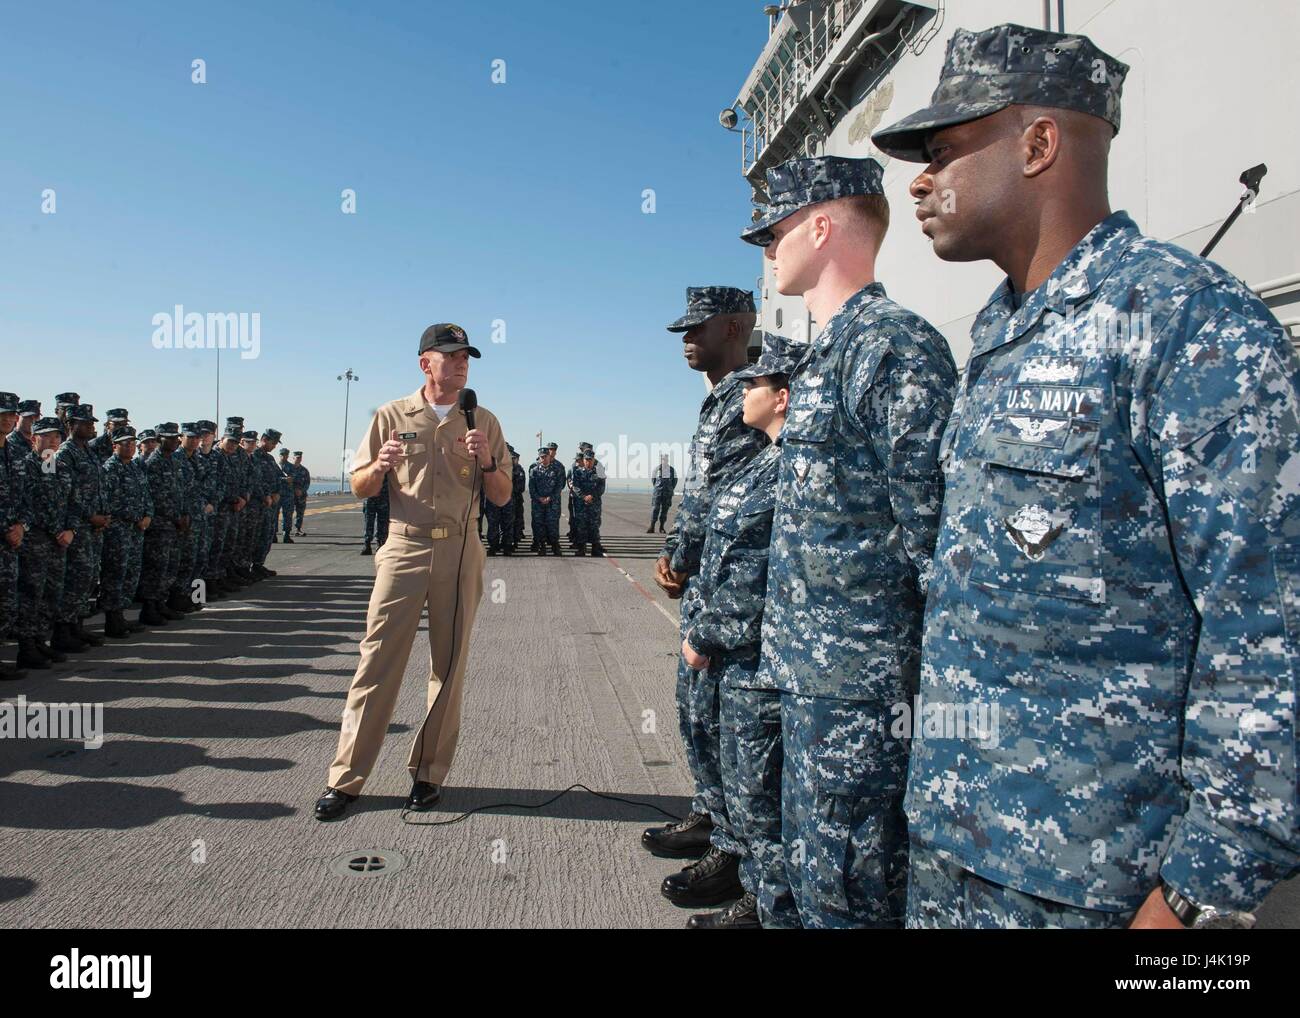 161110-N-FG333-008 SAN DIEGO (Nov. 10, 2016) Master Chief Petty Officer of the Navy (MCPON) Steven Giordano addresses amphibious assault ship USS Boxer (LHD 4) Sailors of the Year during an all hands call. Boxer is currently pier side preparing for a planned maintenance availability. (U.S. Navy photo by Seaman David Ortiz/Released) Stock Photo